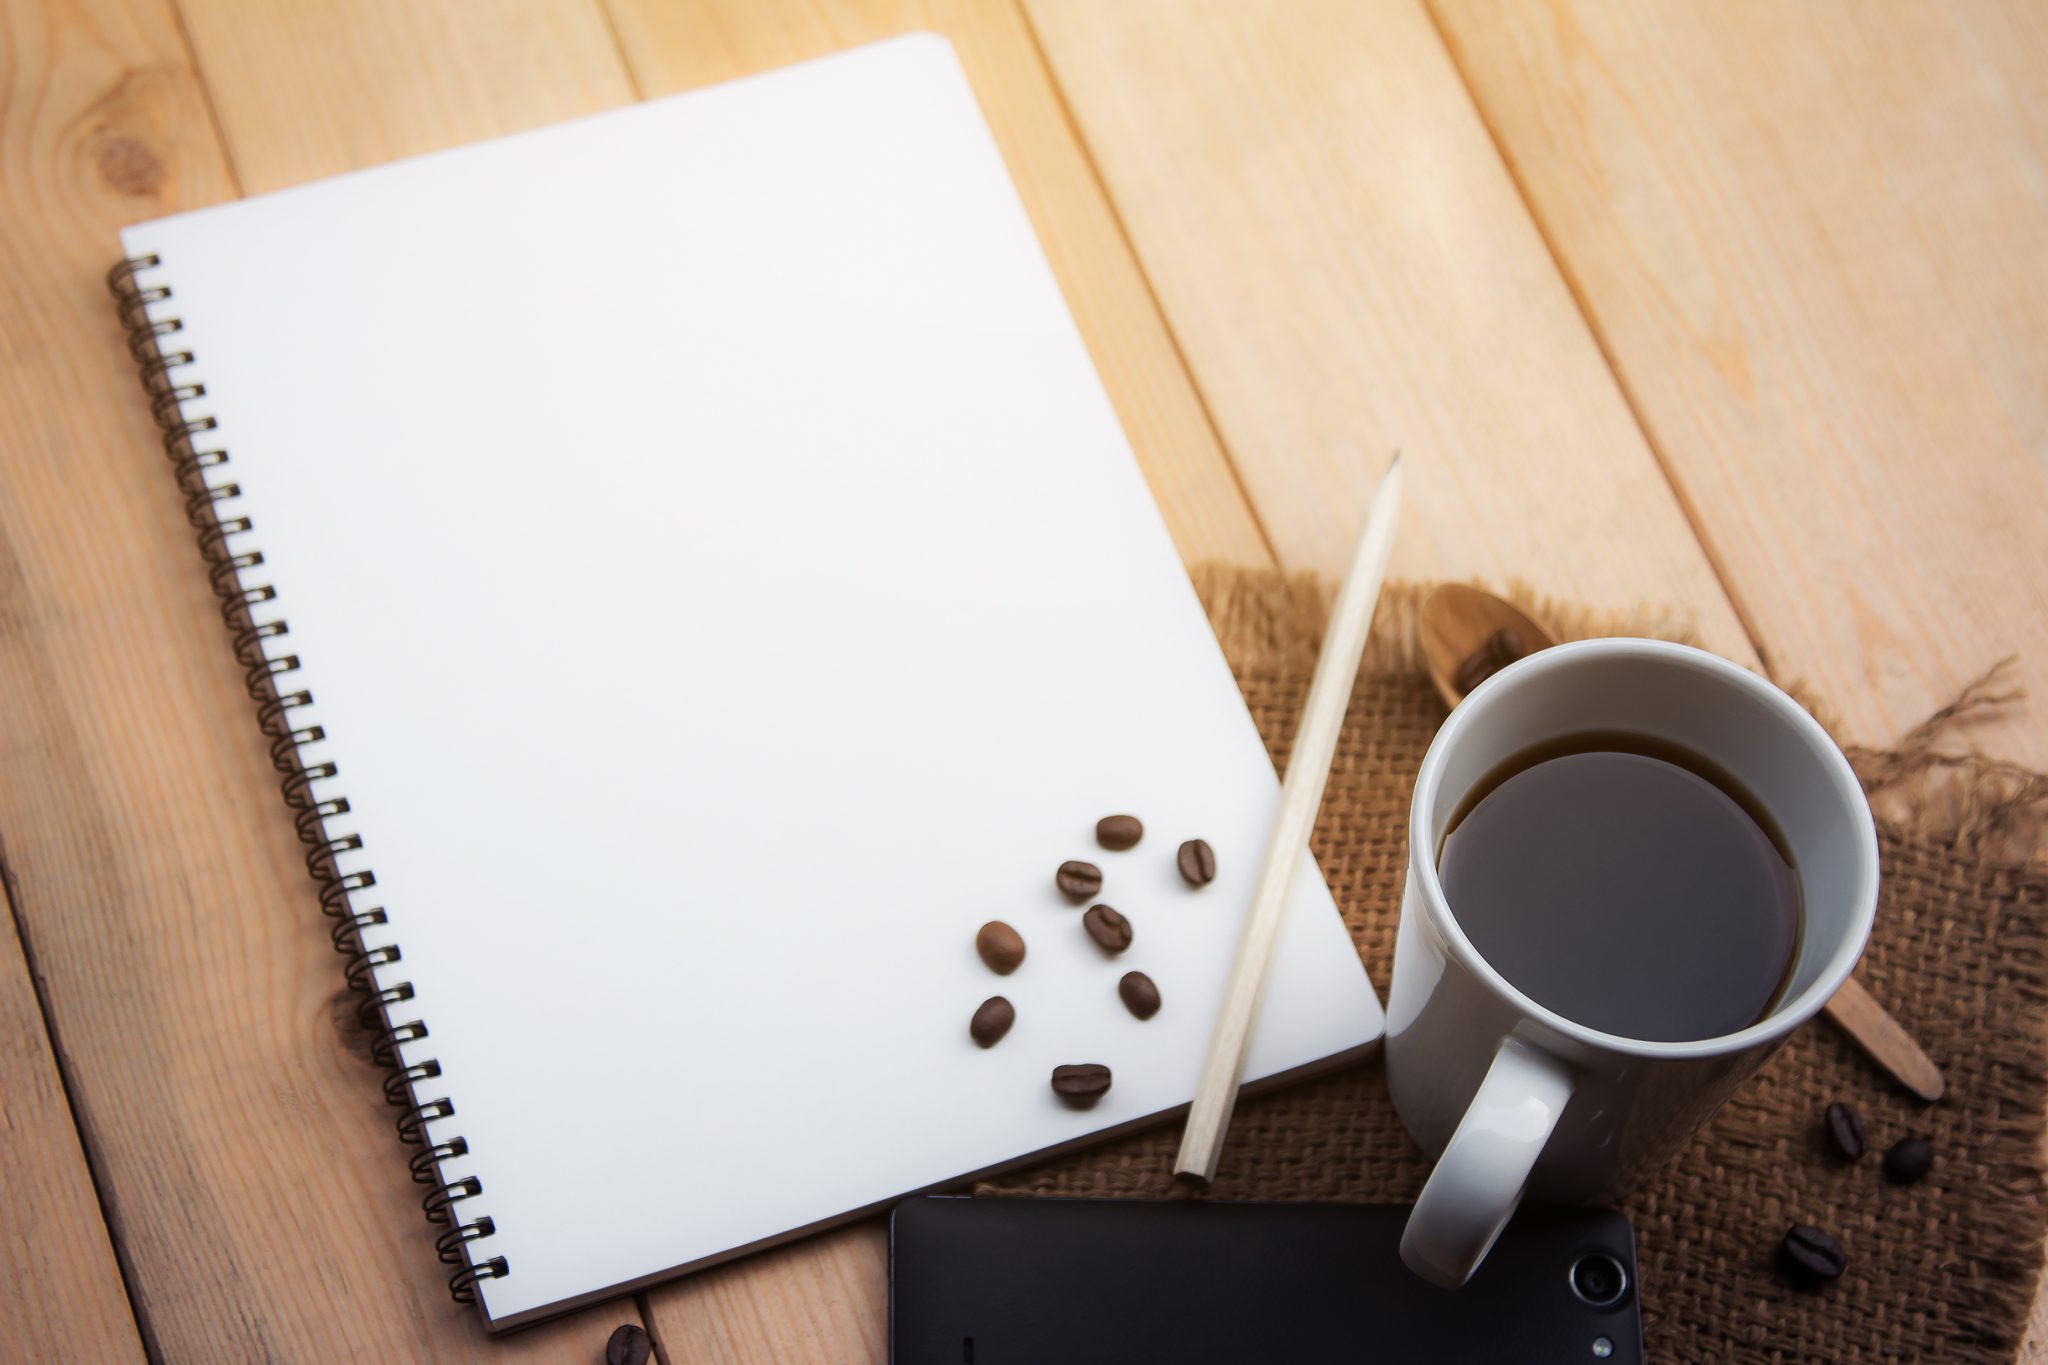 6 Simple Morning Productivity Tips to Start Your Day Off Right